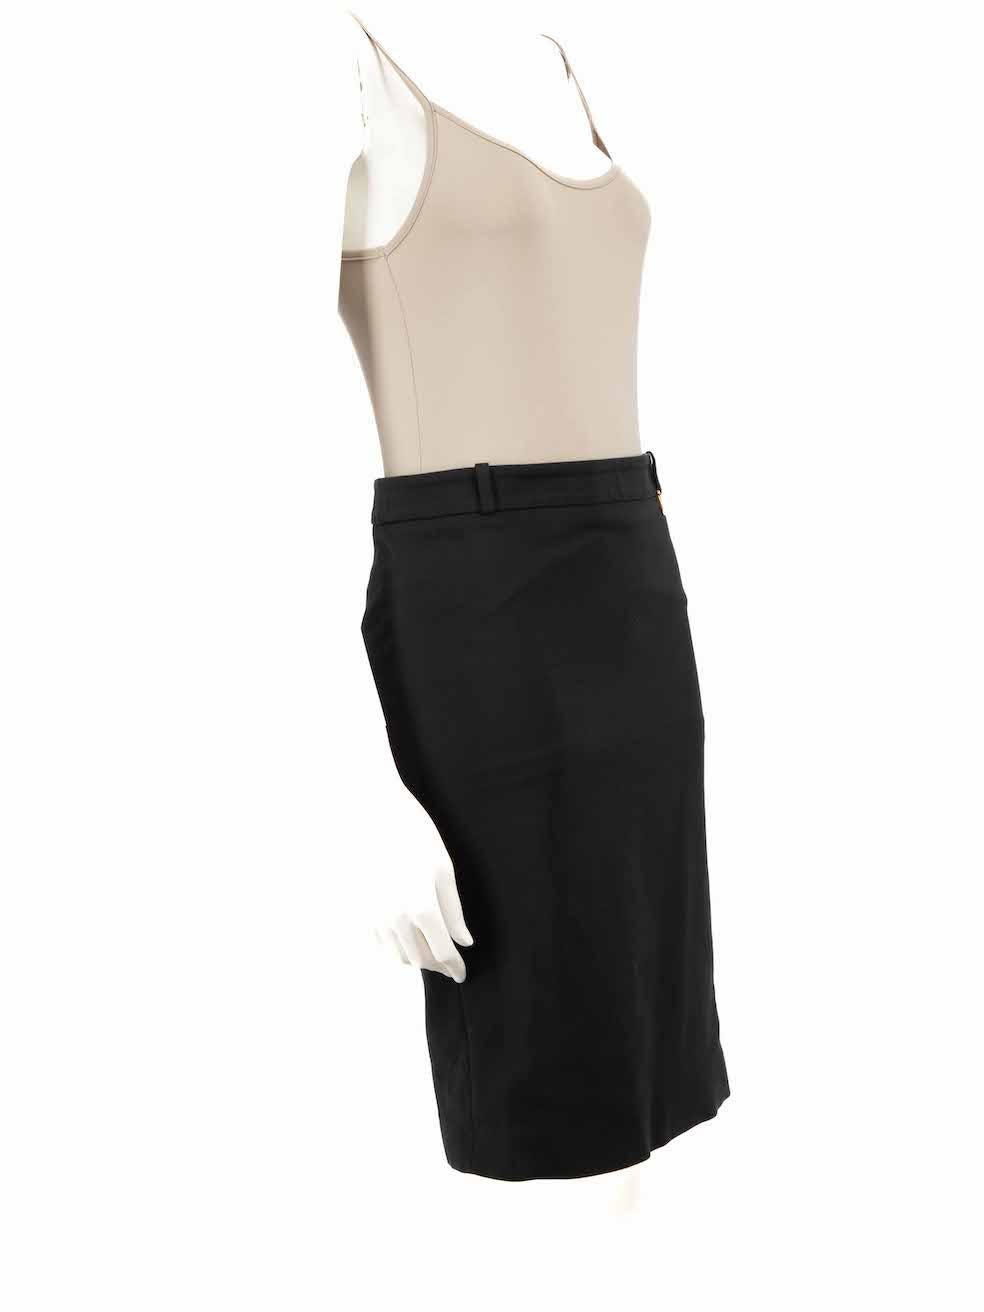 CONDITION is Very good. Minimal wear to skirt is evident. Minimal wear to zip pull on this used Gucci designer resale item.
 
 
 
 Details
 
 
 Black
 
 Cotton
 
 Pencil skirt
 
 Knee length
 
 Belt hoops
 
 Horsebit detail
 
 Back zip closure with